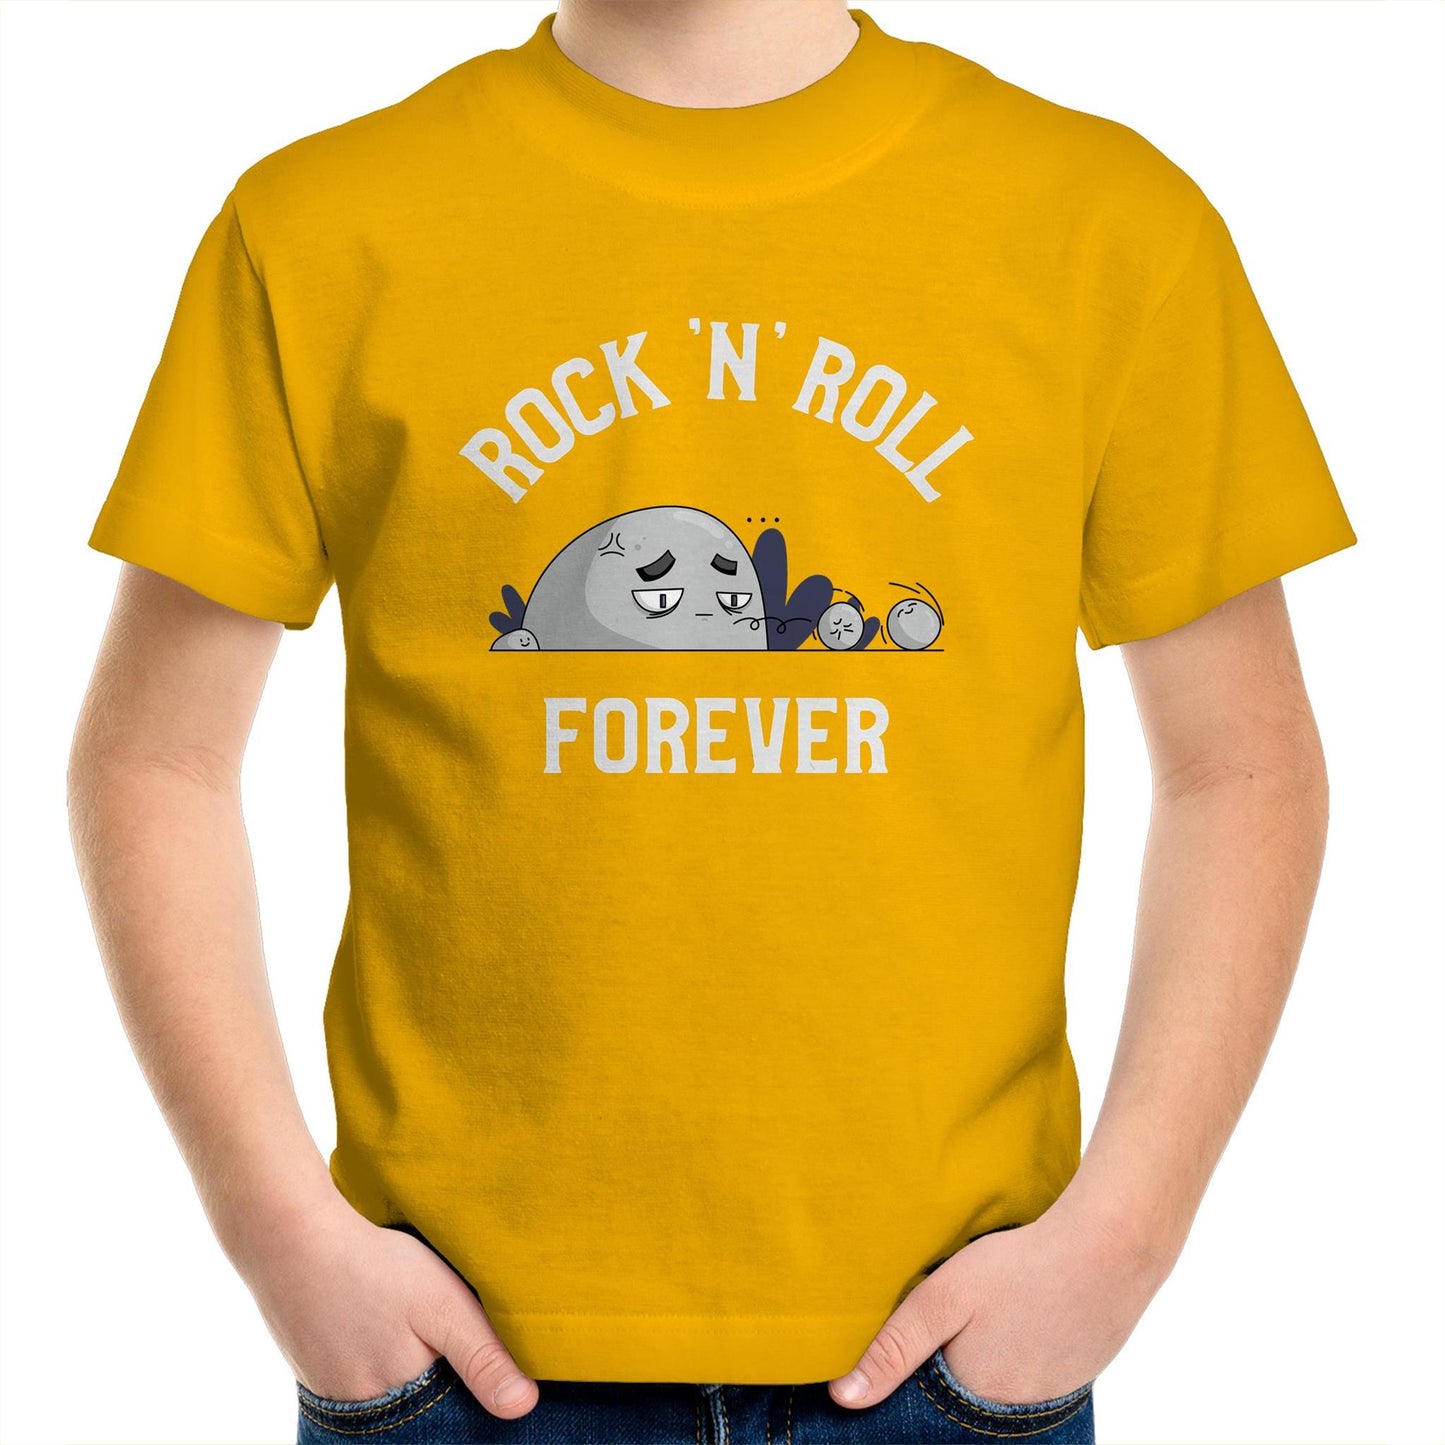 Rock 'N' Roll Forever - Kids Youth T-Shirt Gold Kids Youth T-shirt Music